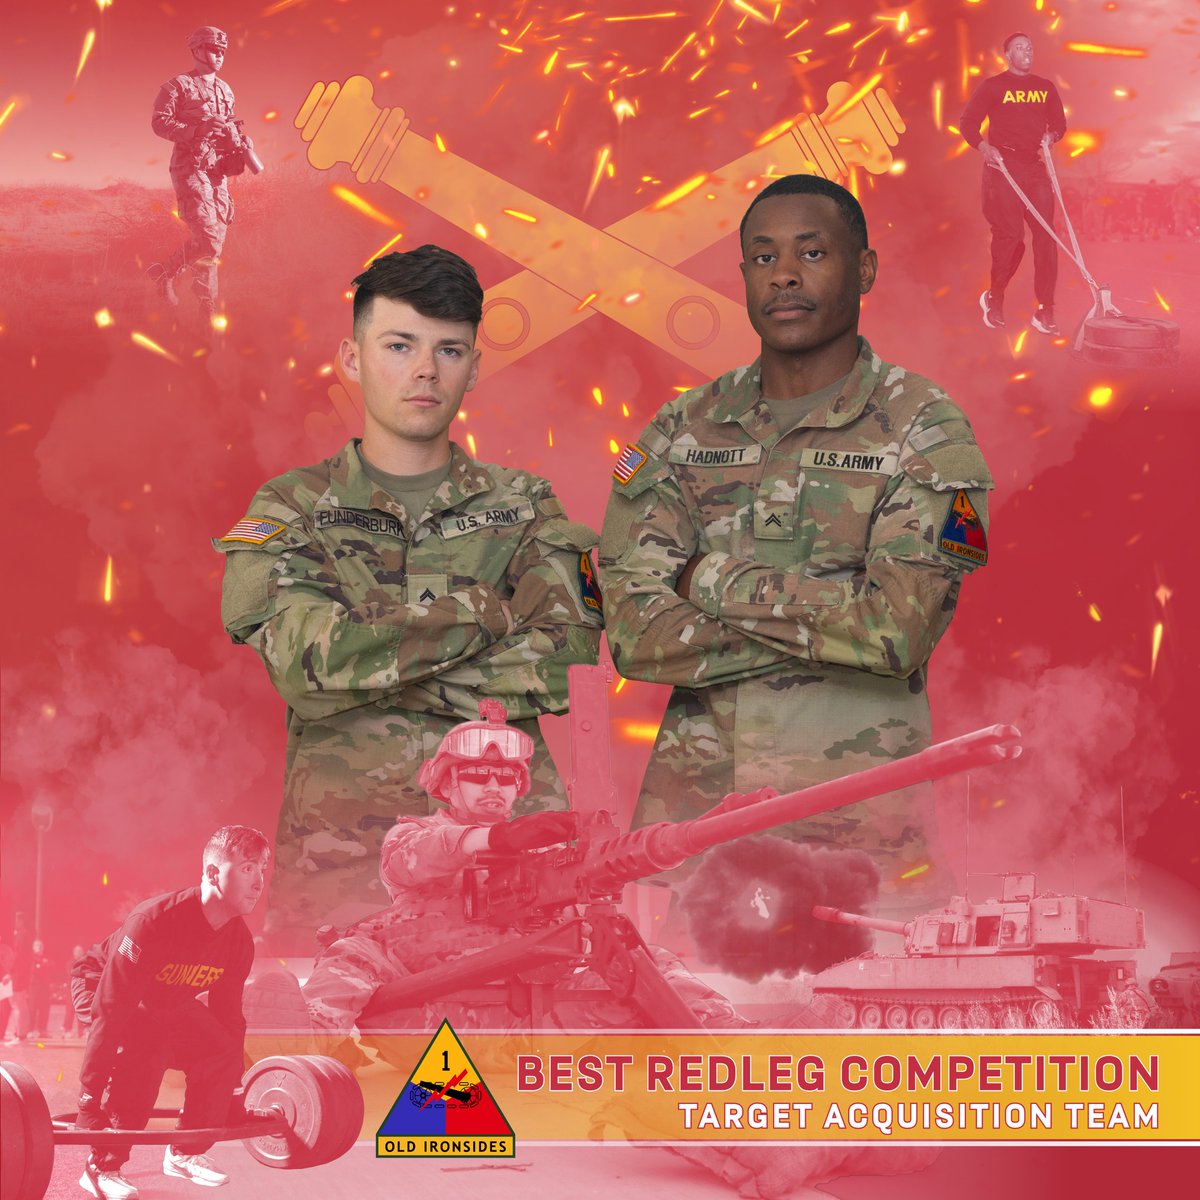 The 1AD's Best Redleg Teams compete in 2024 GEN Raymond T. Odierno Best Redleg Competition starting today. Good luck to our teams! You've displayed excellence so far, keep the momentum going!💥🎯 #IronSoldiers #IronSteel #BestRedleg #KingOfBattle #FieldArtillery